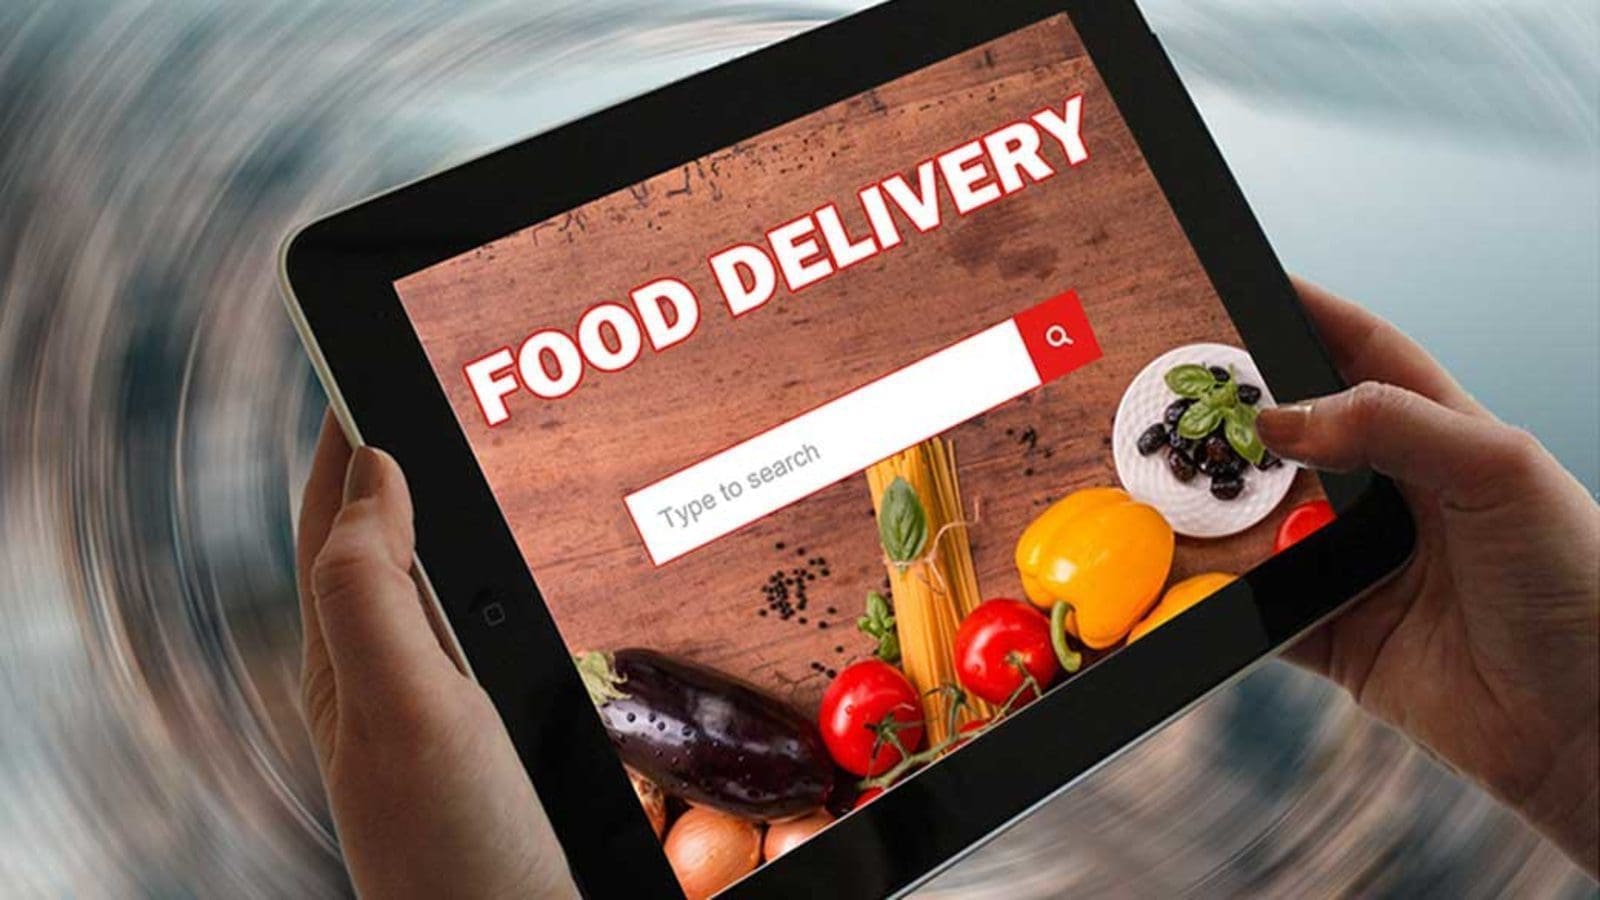 PFSE targets users of food delivery services in food safety campaign